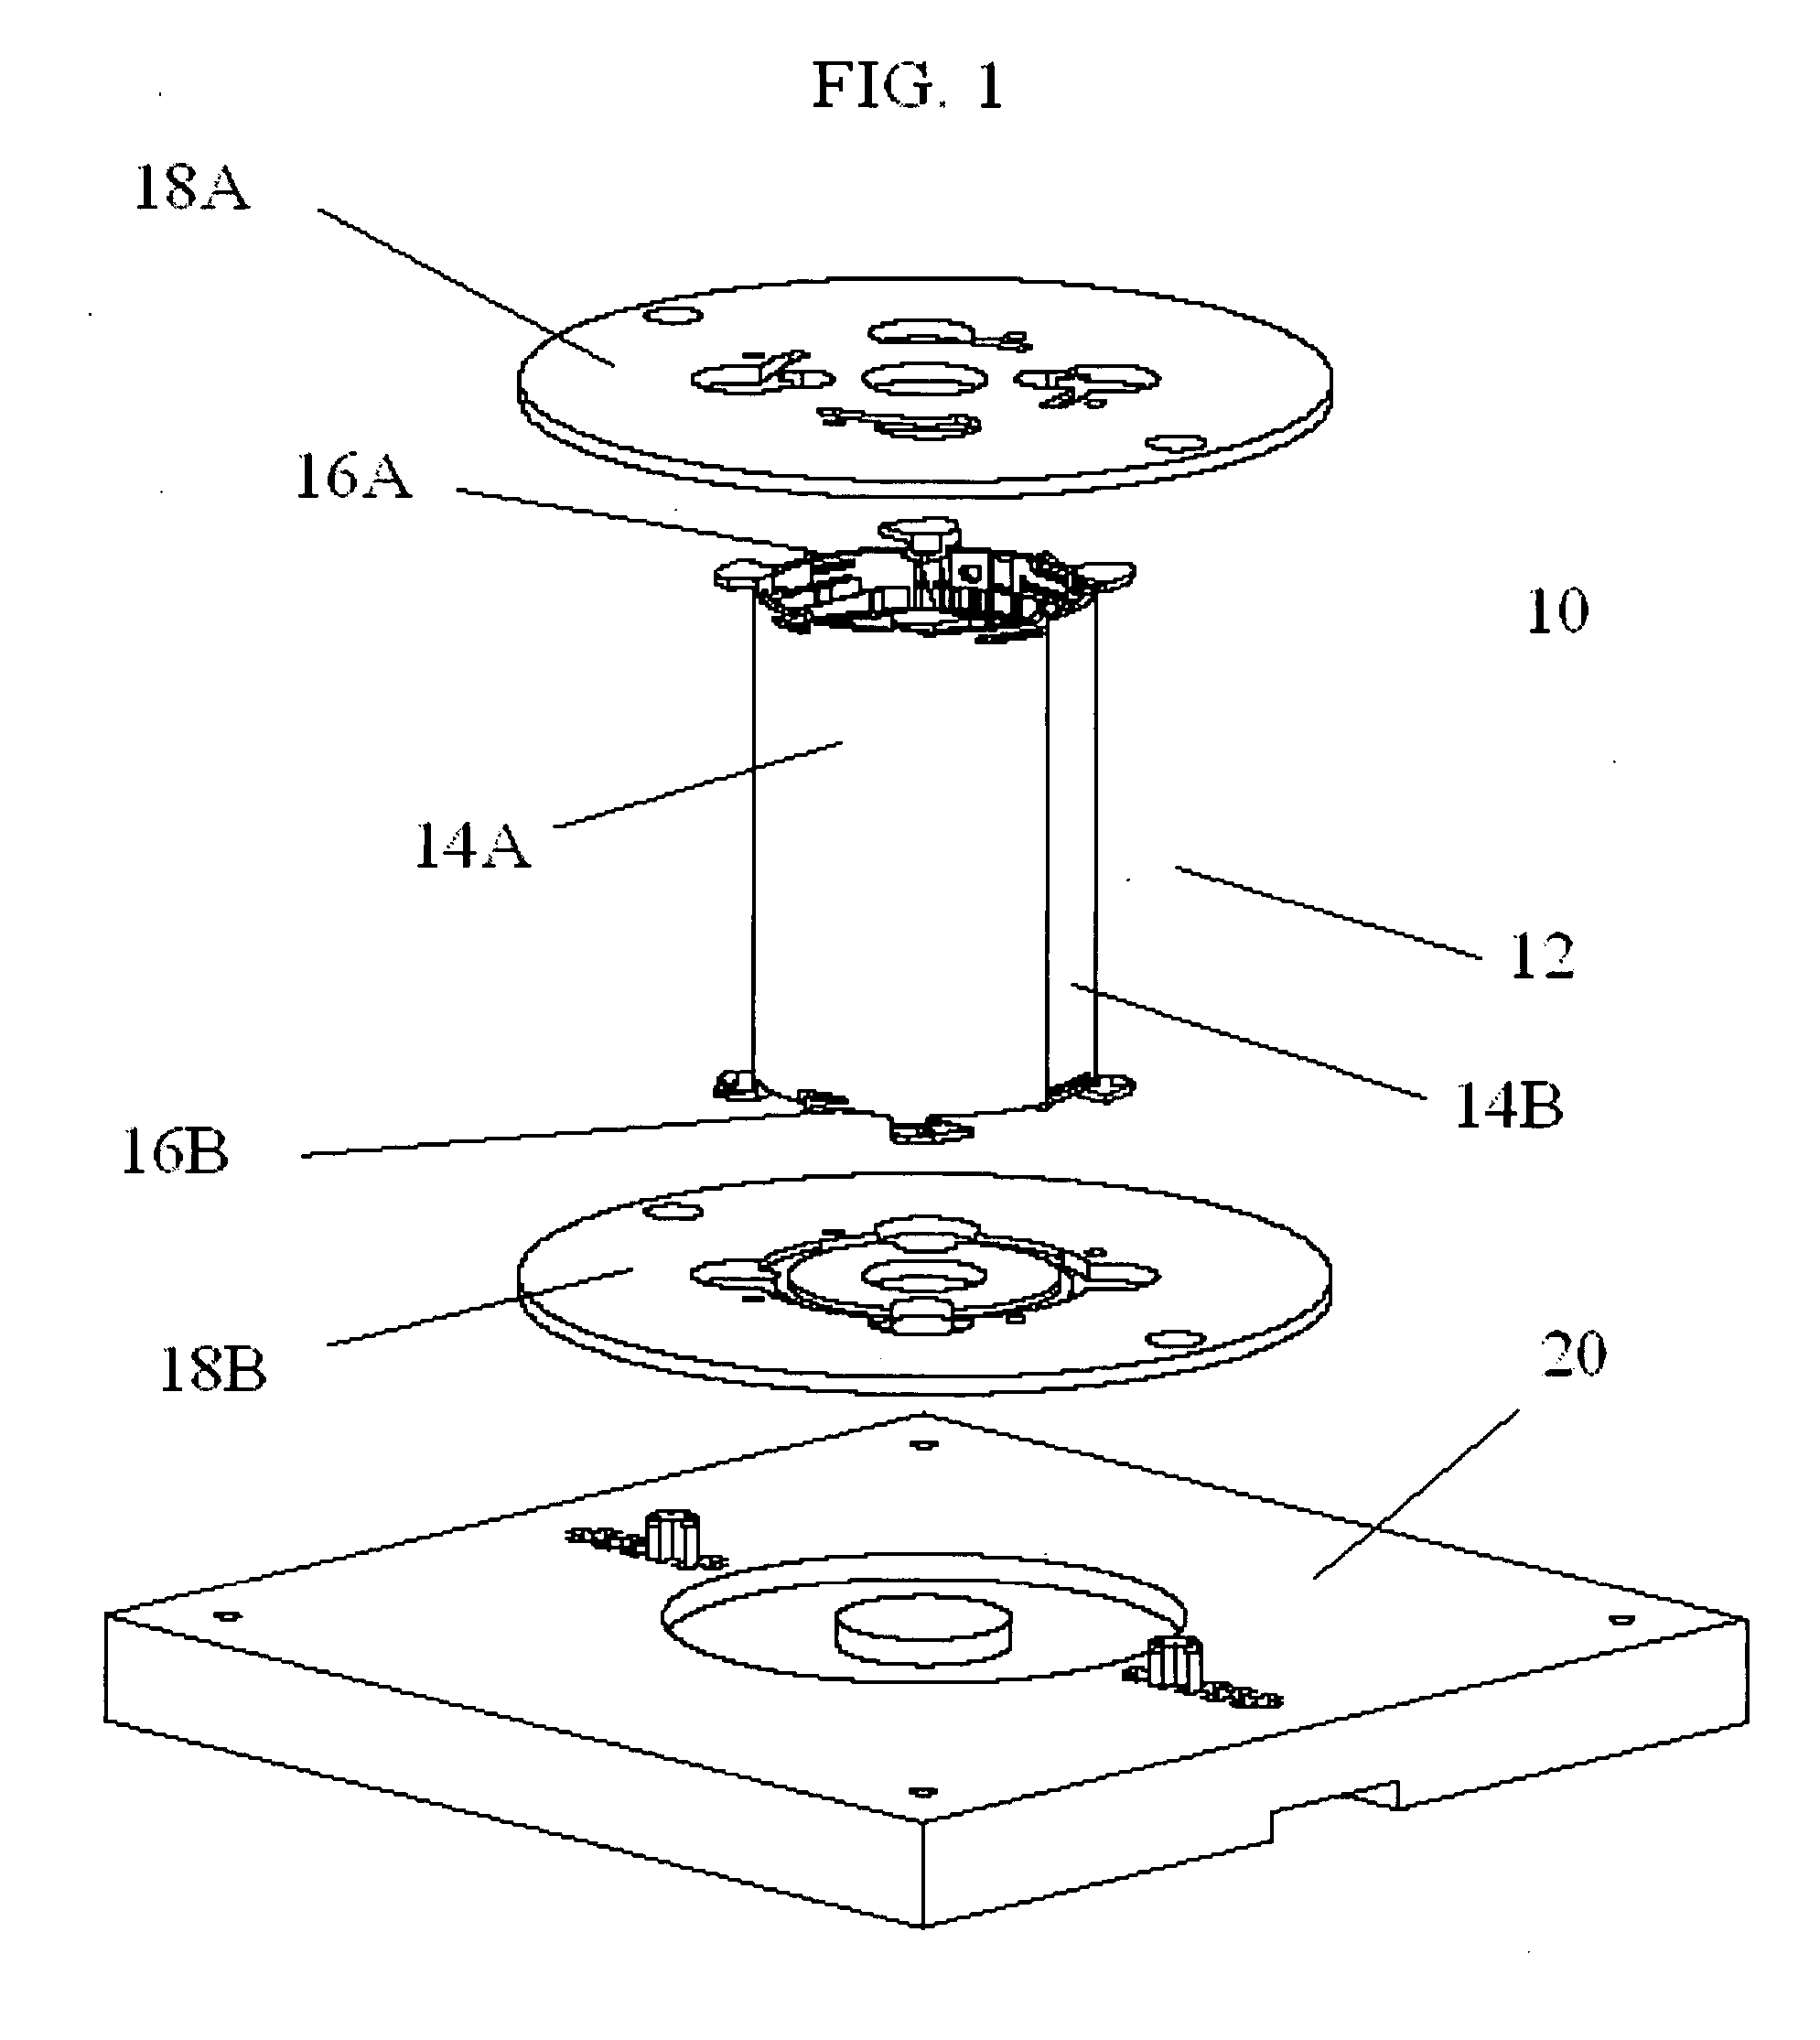 Storage and transport device for flexible material and method of making same